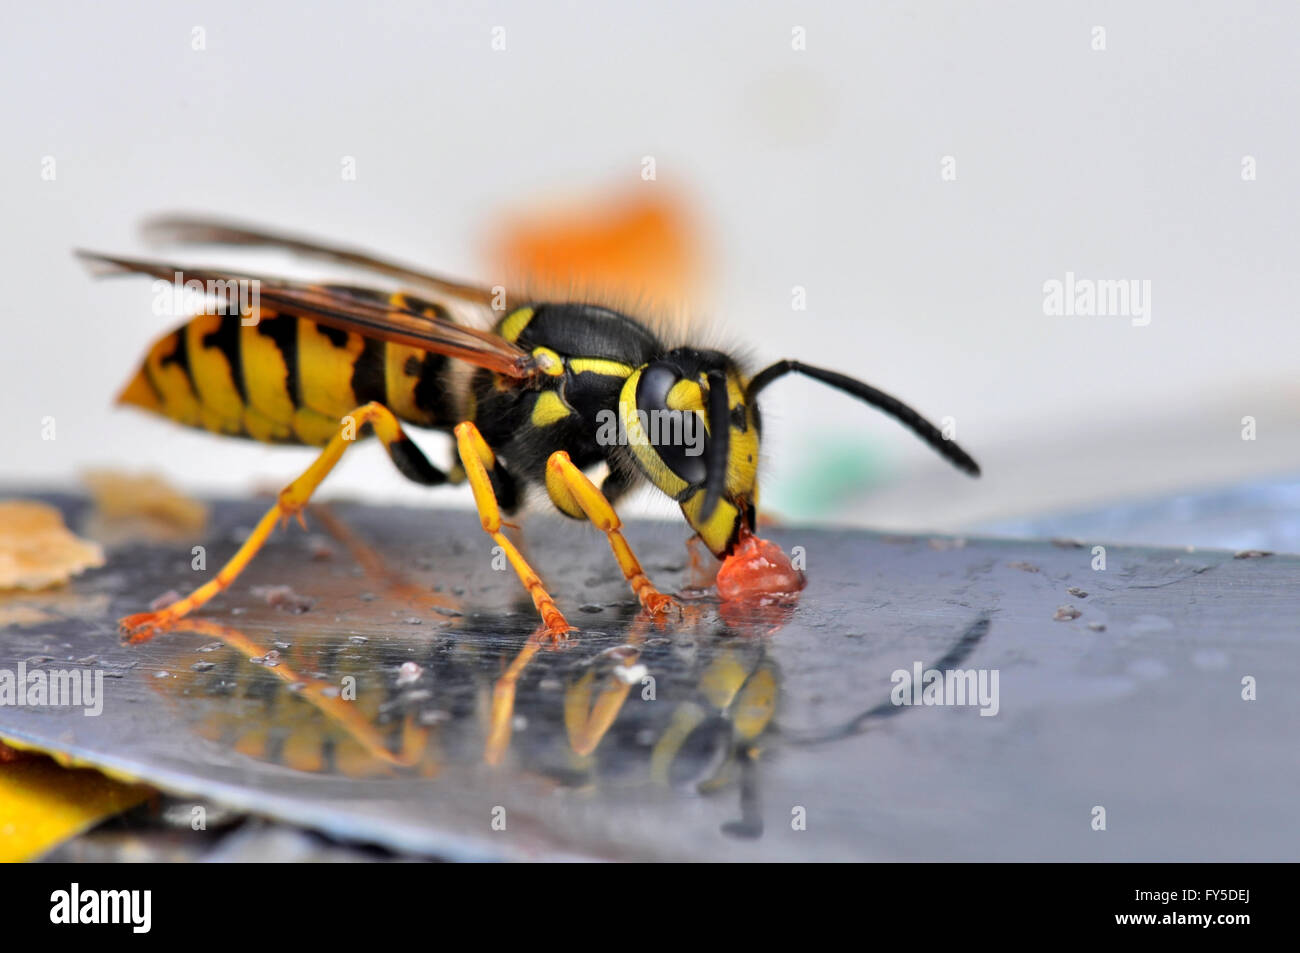 Macro of a wasp on a bread knife Stock Photo